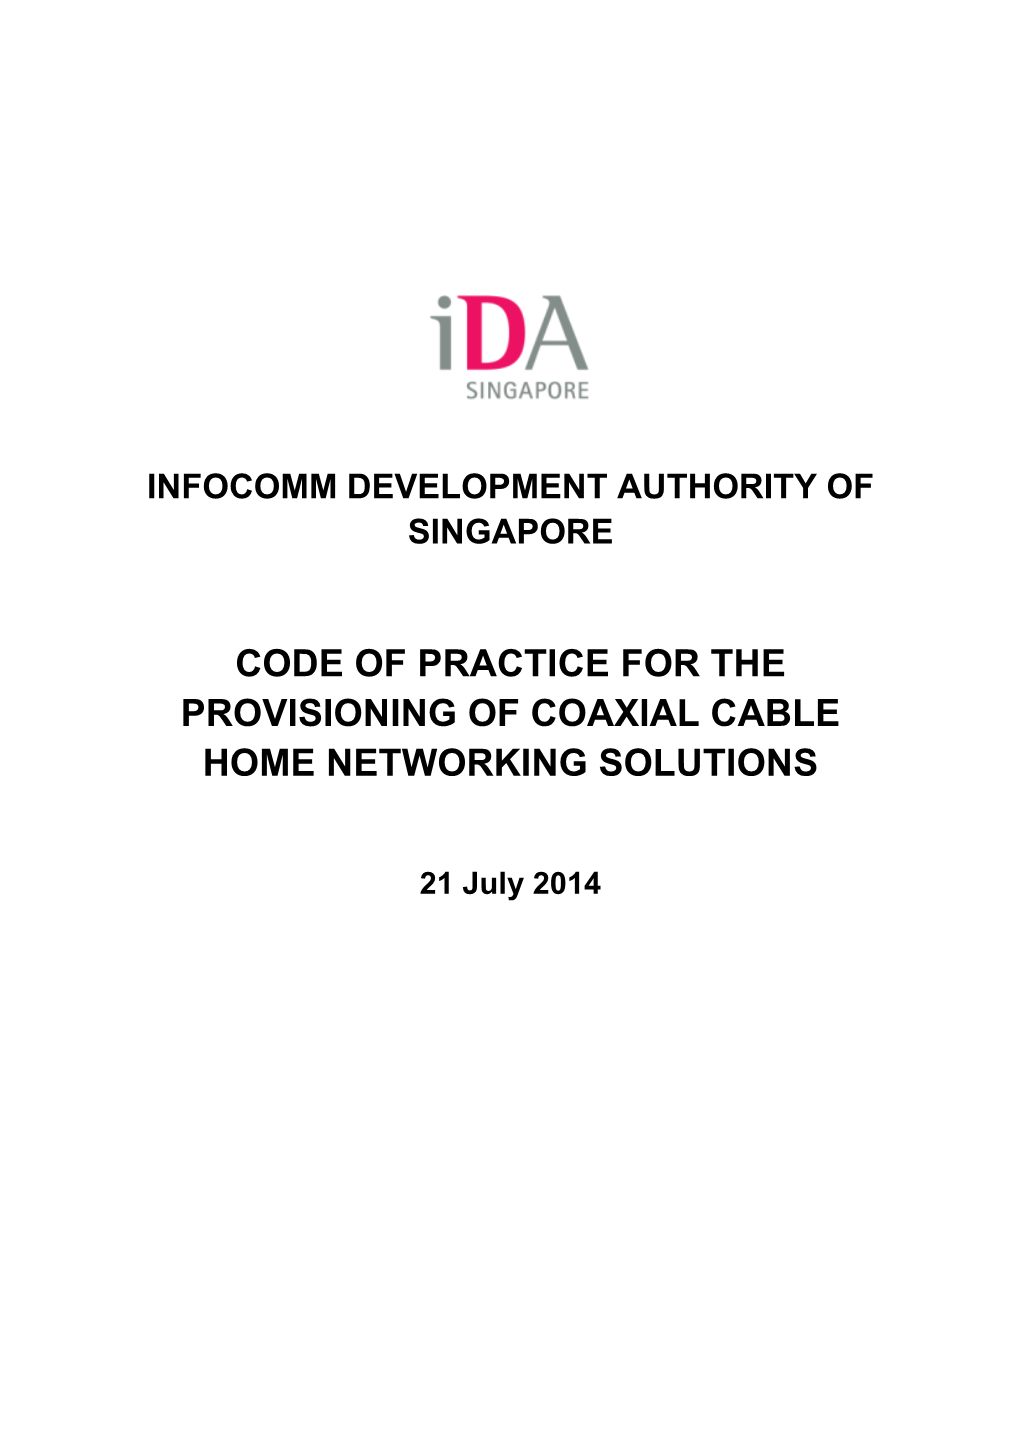 Code of Practice for the Provisioning of Coaxial Cable Home Networking Solutions